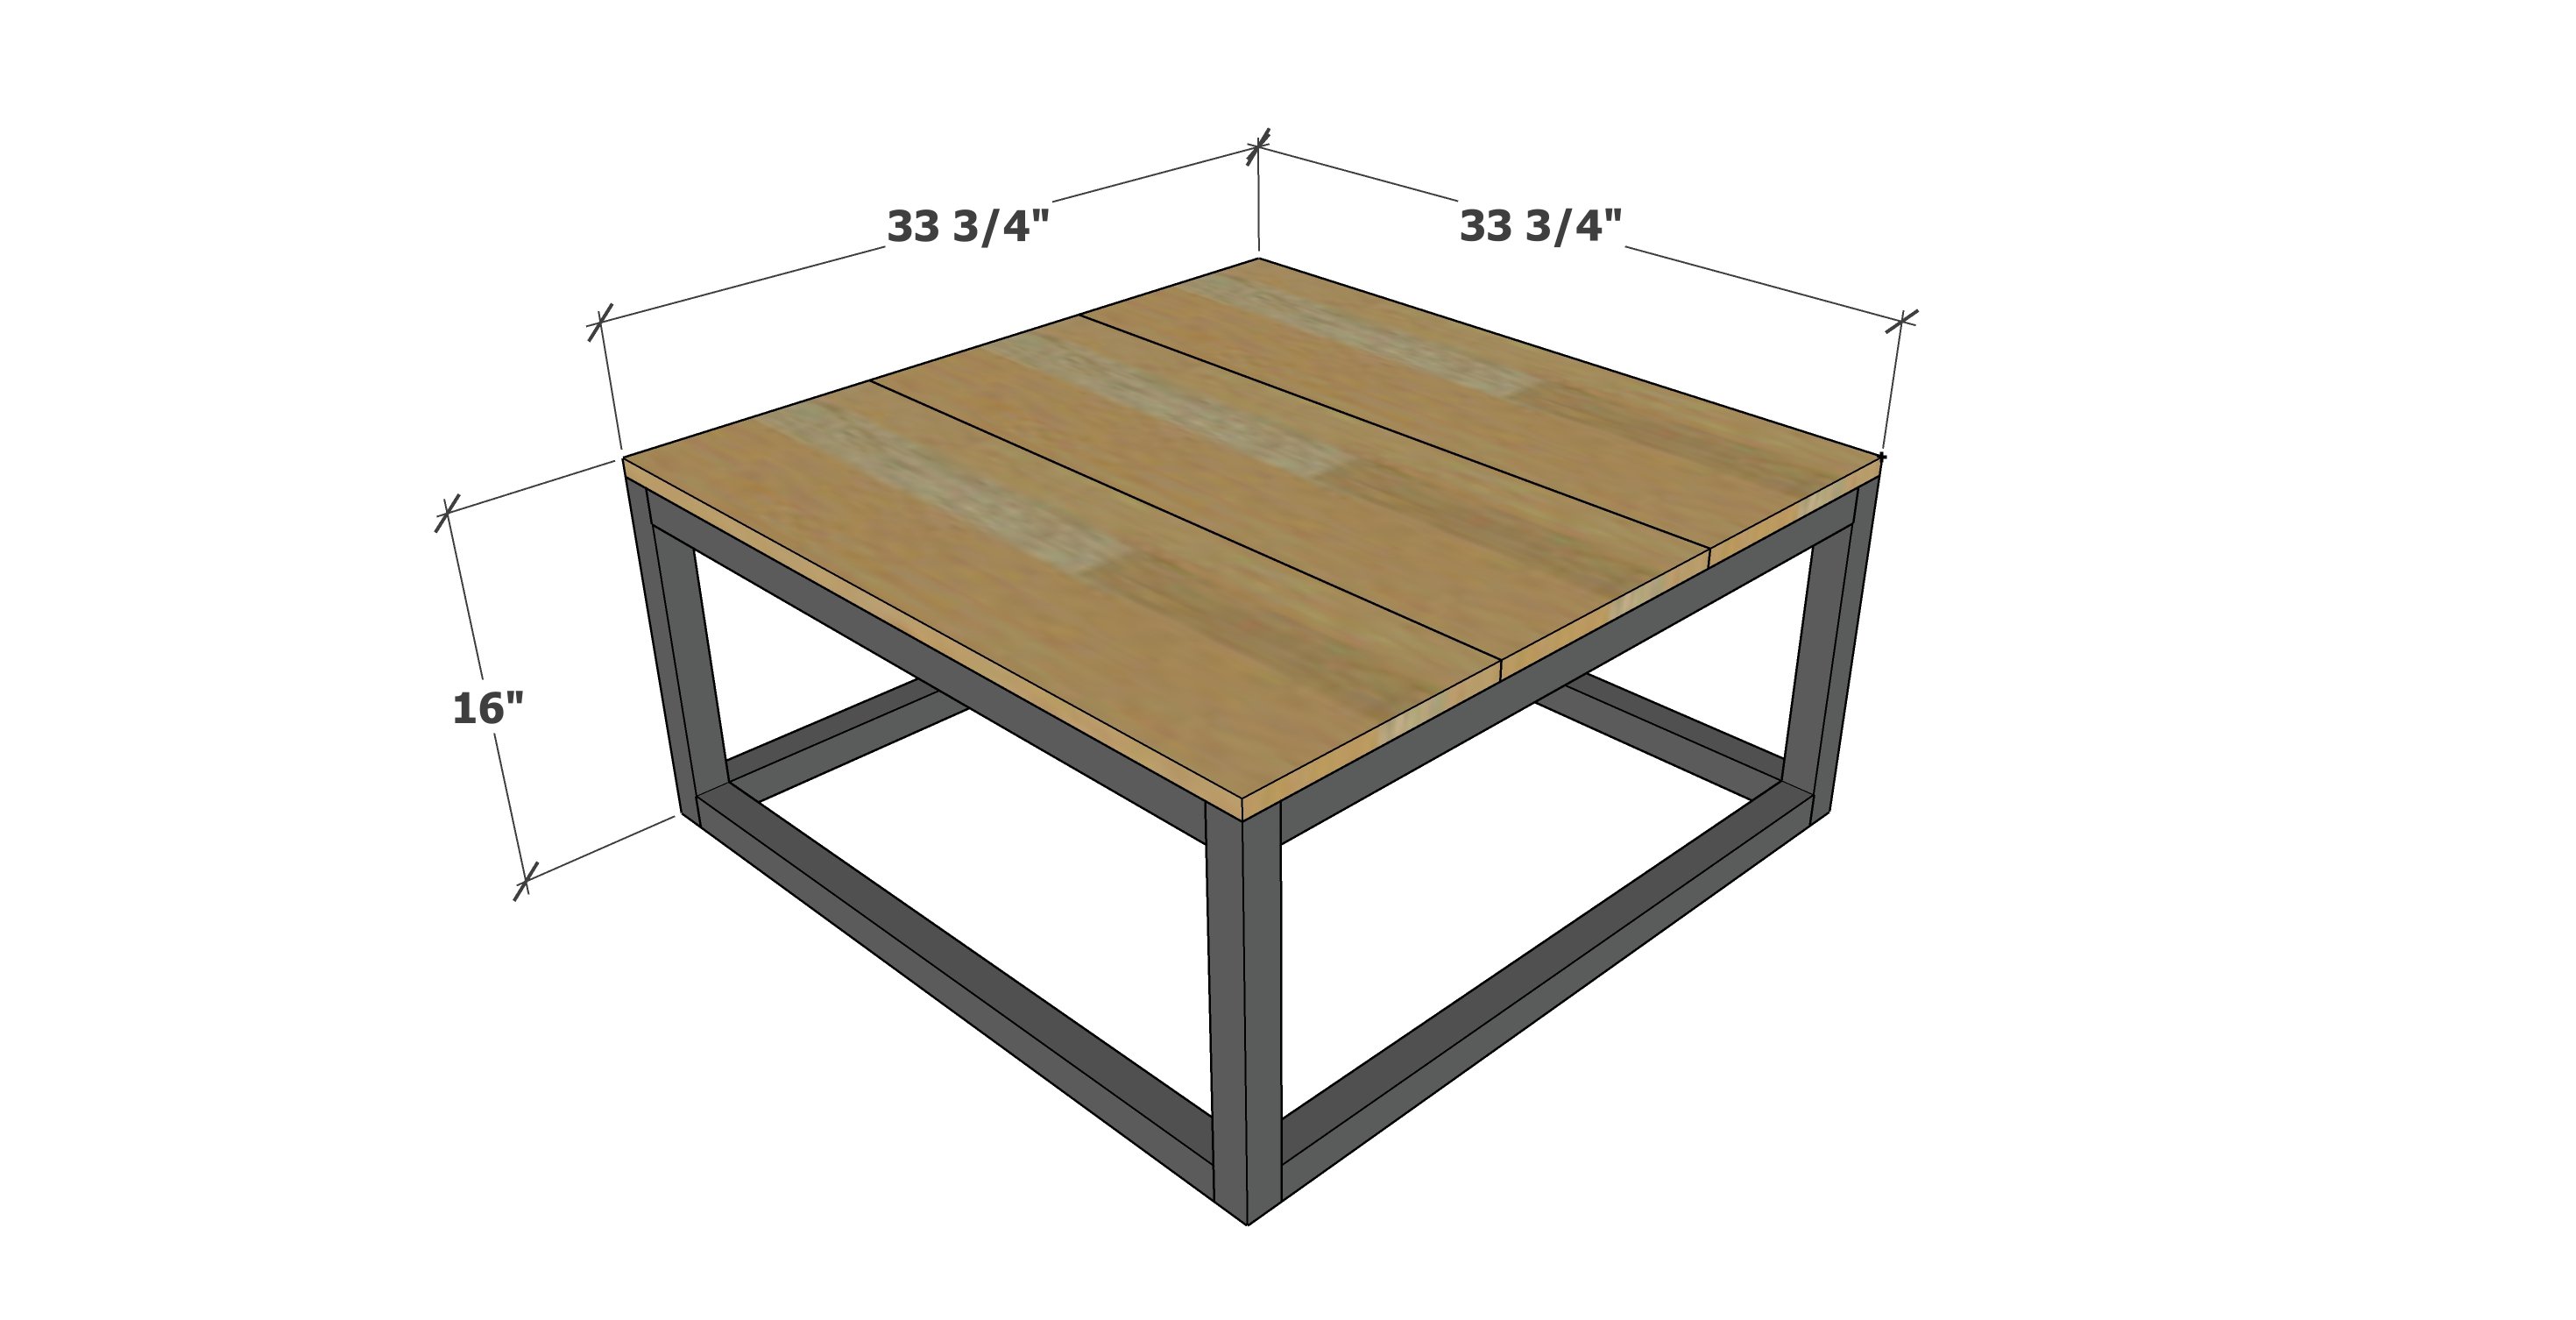 square coffee table plans